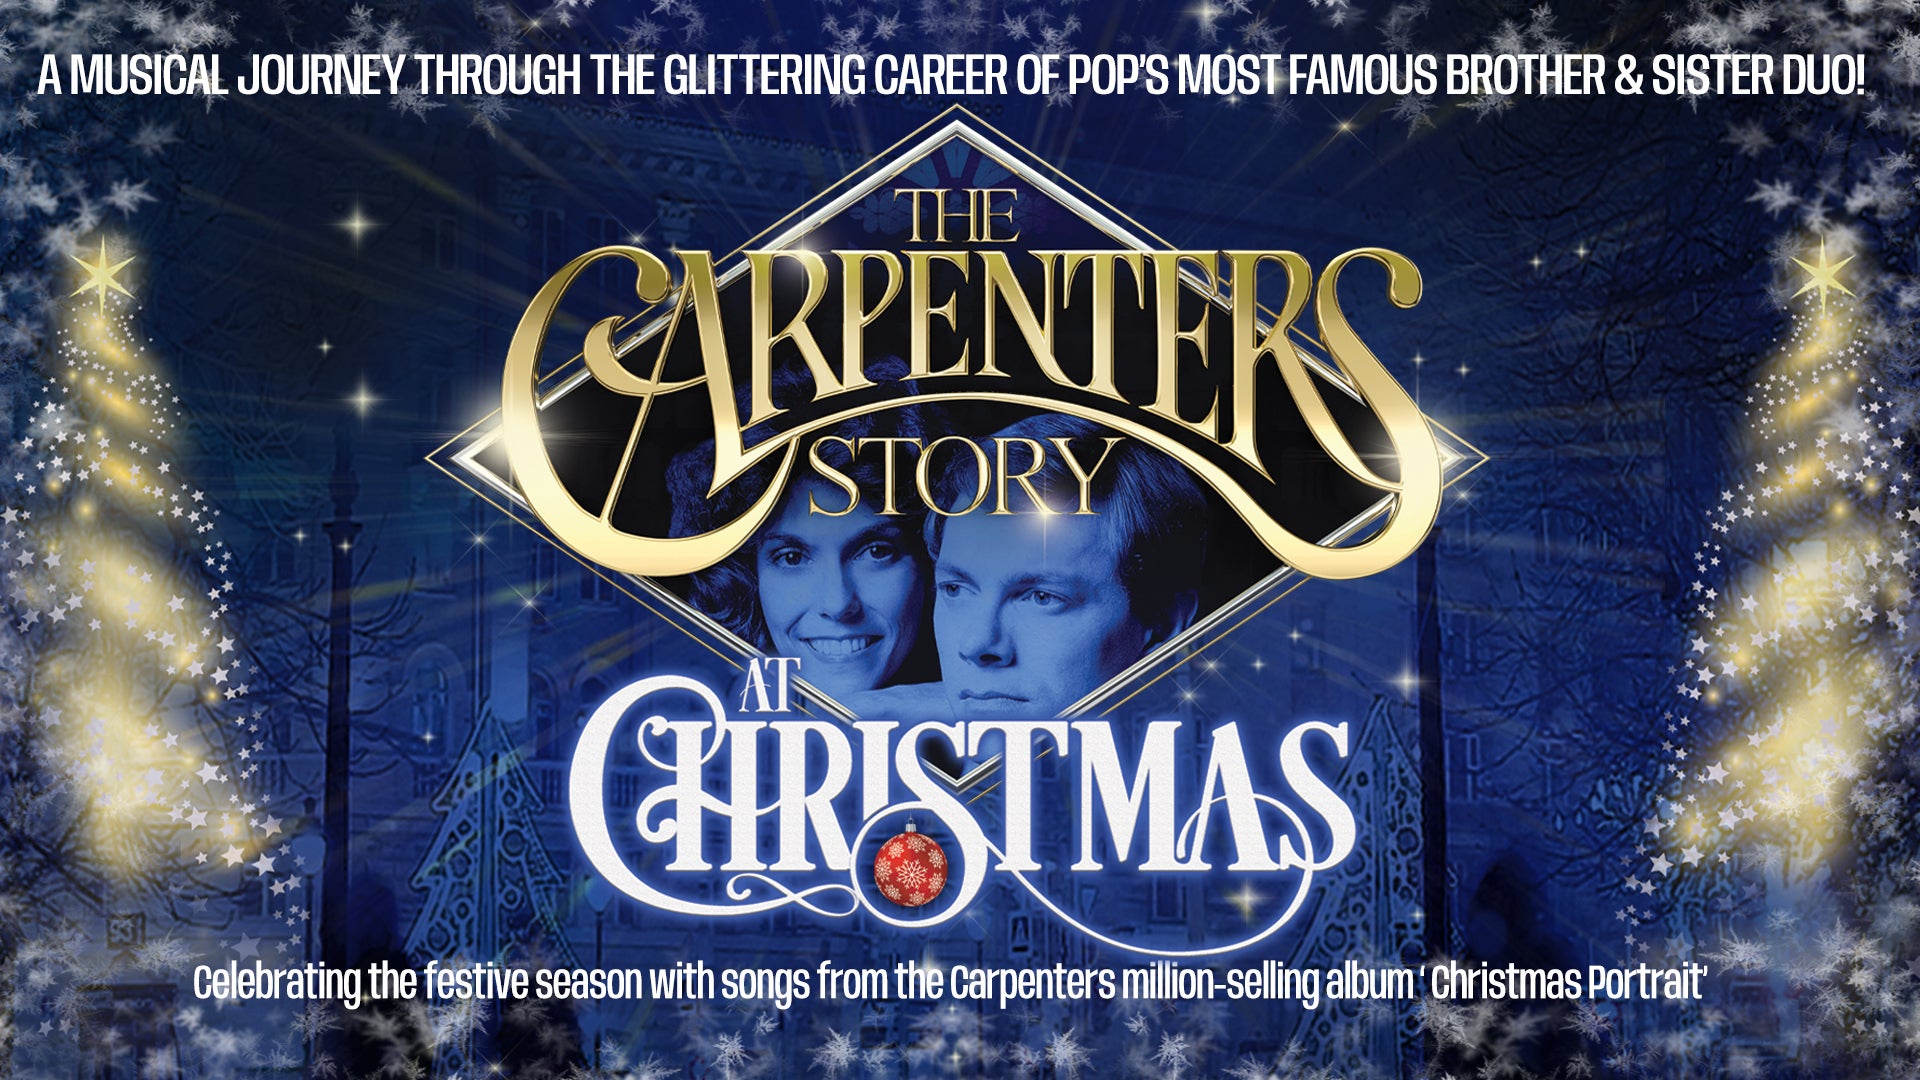 Image name The Carpenters Story The Carpenters at Christmas at York Barbican York the 1 image from the post The Carpenter's Story - The Carpenters at Christmas at York Barbican, York in Yorkshire.com.